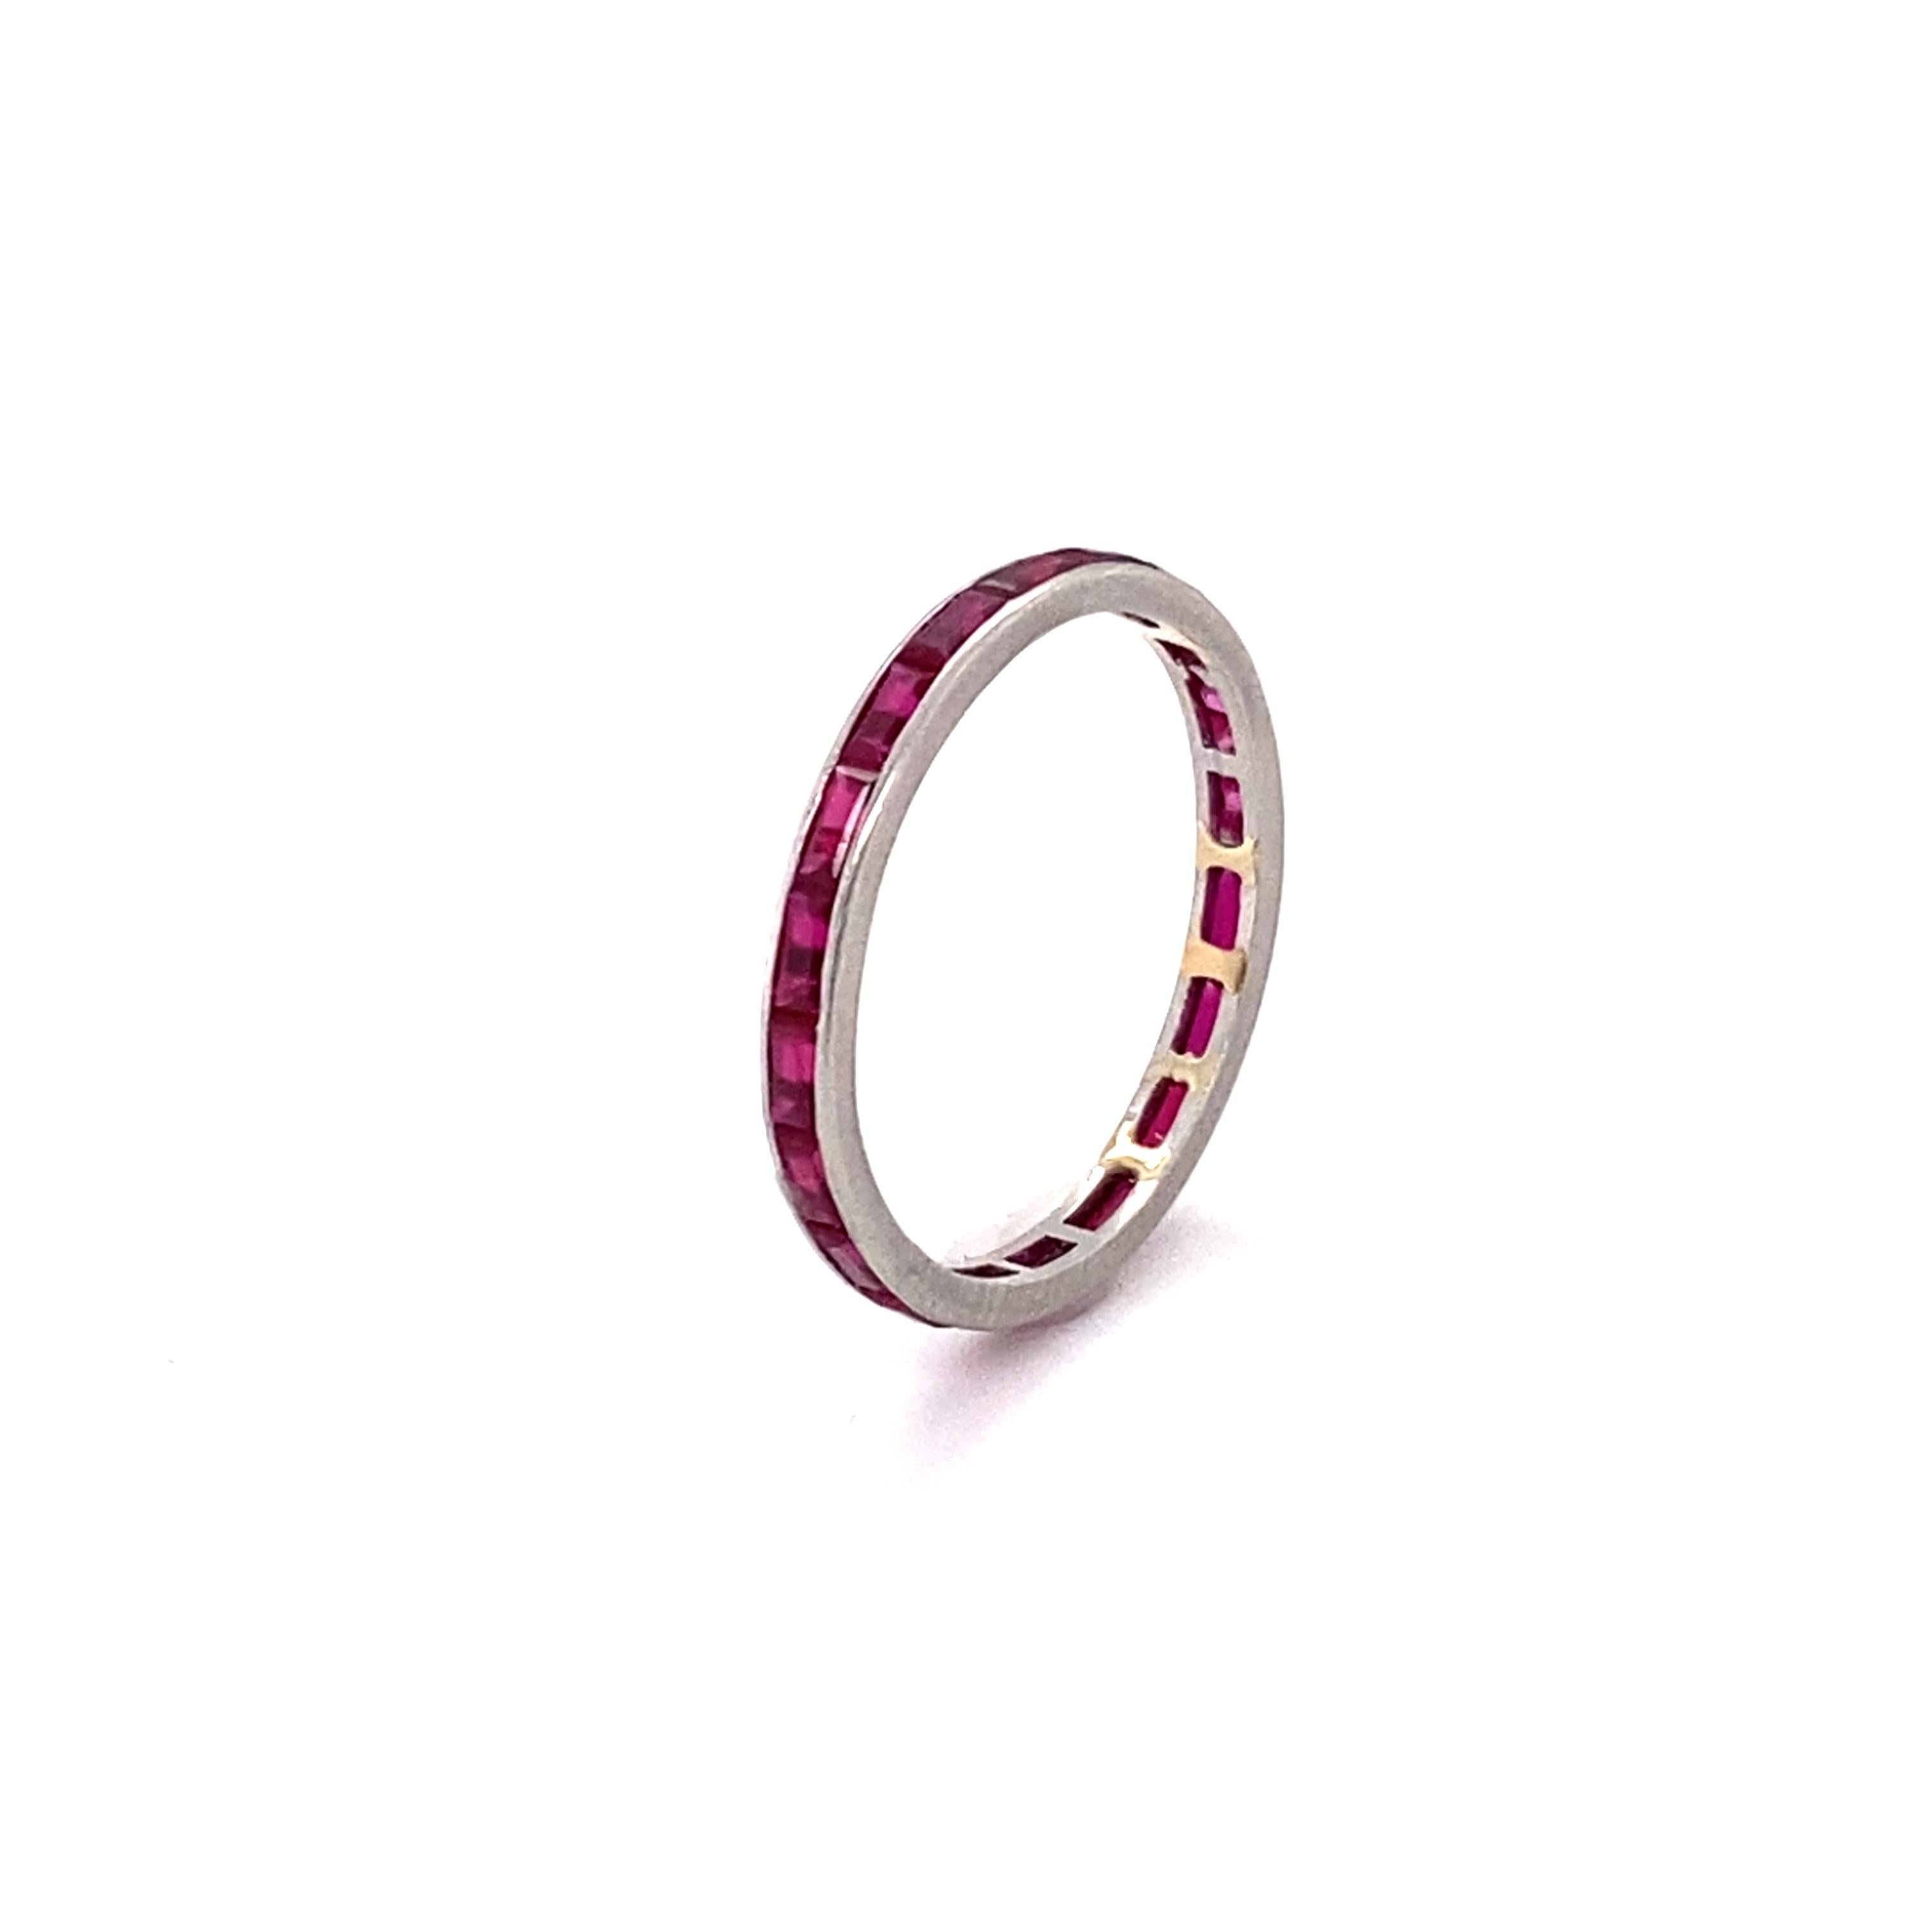 Item Details:
Metal Type: Platinum
Weight: 1.3 grams
Size: 5.75 (not resizable)
1940s

Ruby Details:
Cut: French Baguettes
Carat: 0.40
Color: Vivid Red

Item Features:
This Beautiful Retro eternity band is very well made with 0.40 carat French